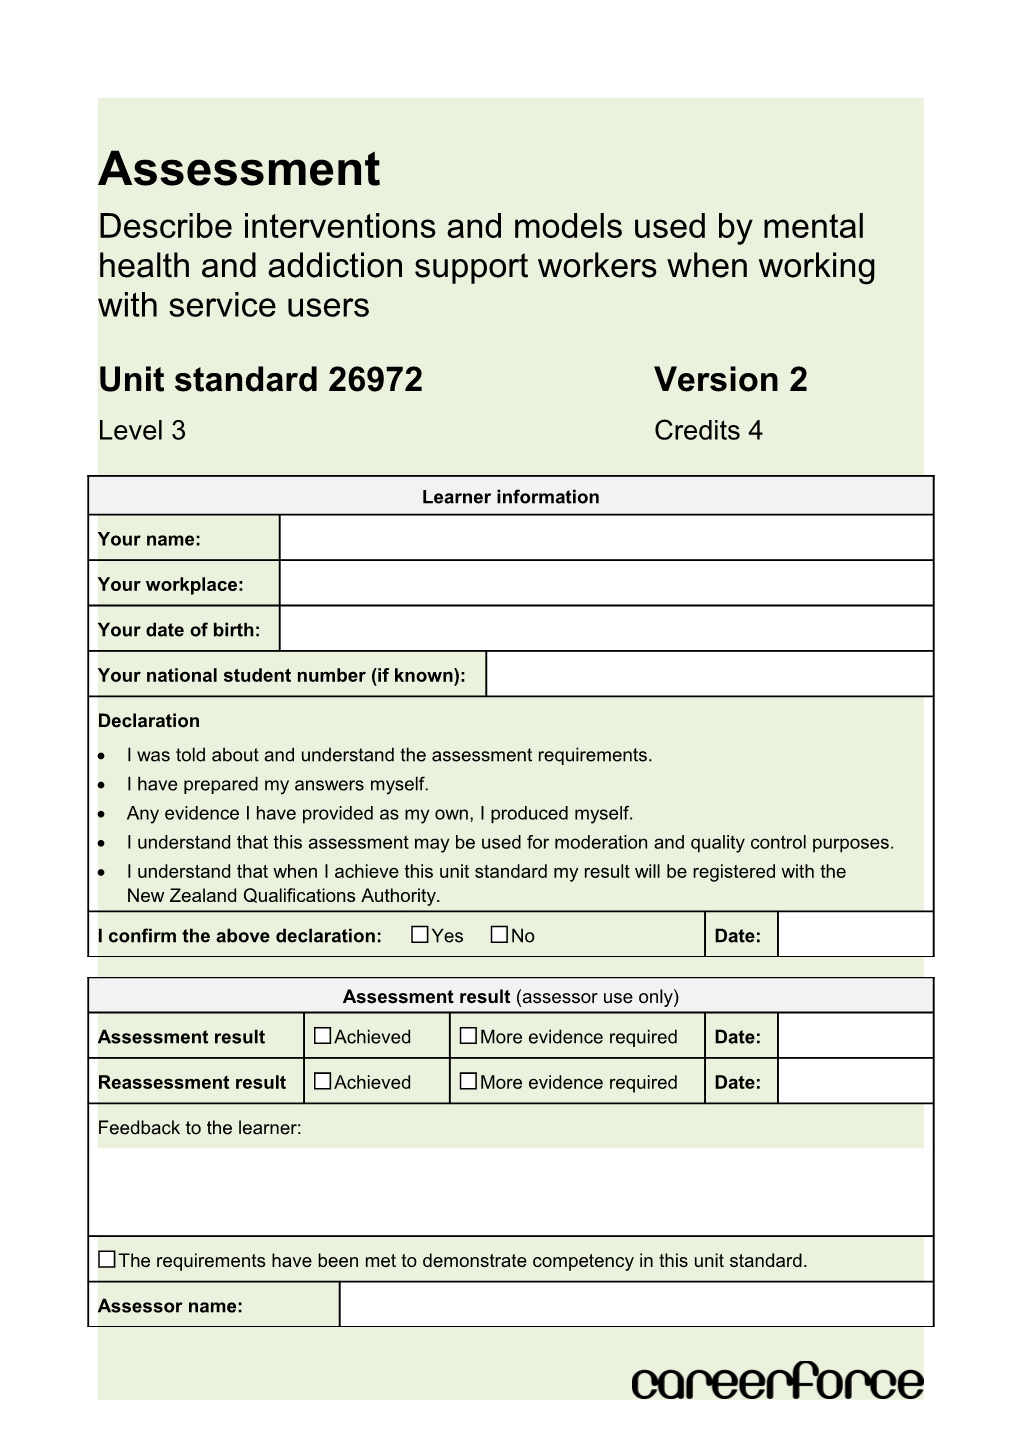 Describe Interventions and Models Used by Mental Health and Addiction Support Workers When